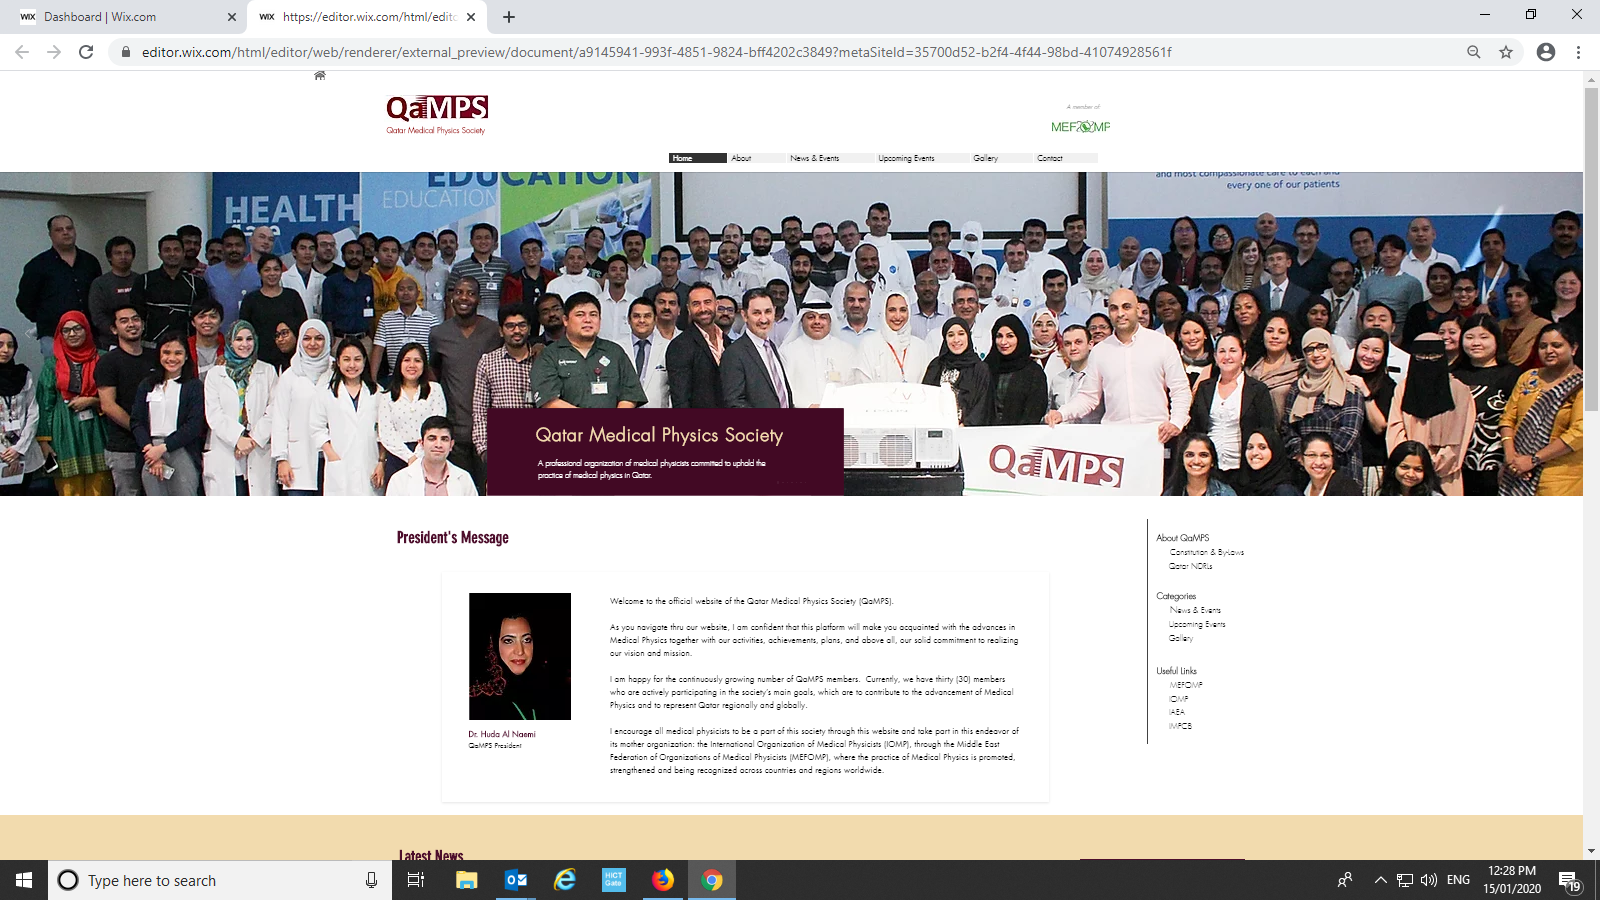 Qatar Medical Physics Society (QaMPS) Launches their Website